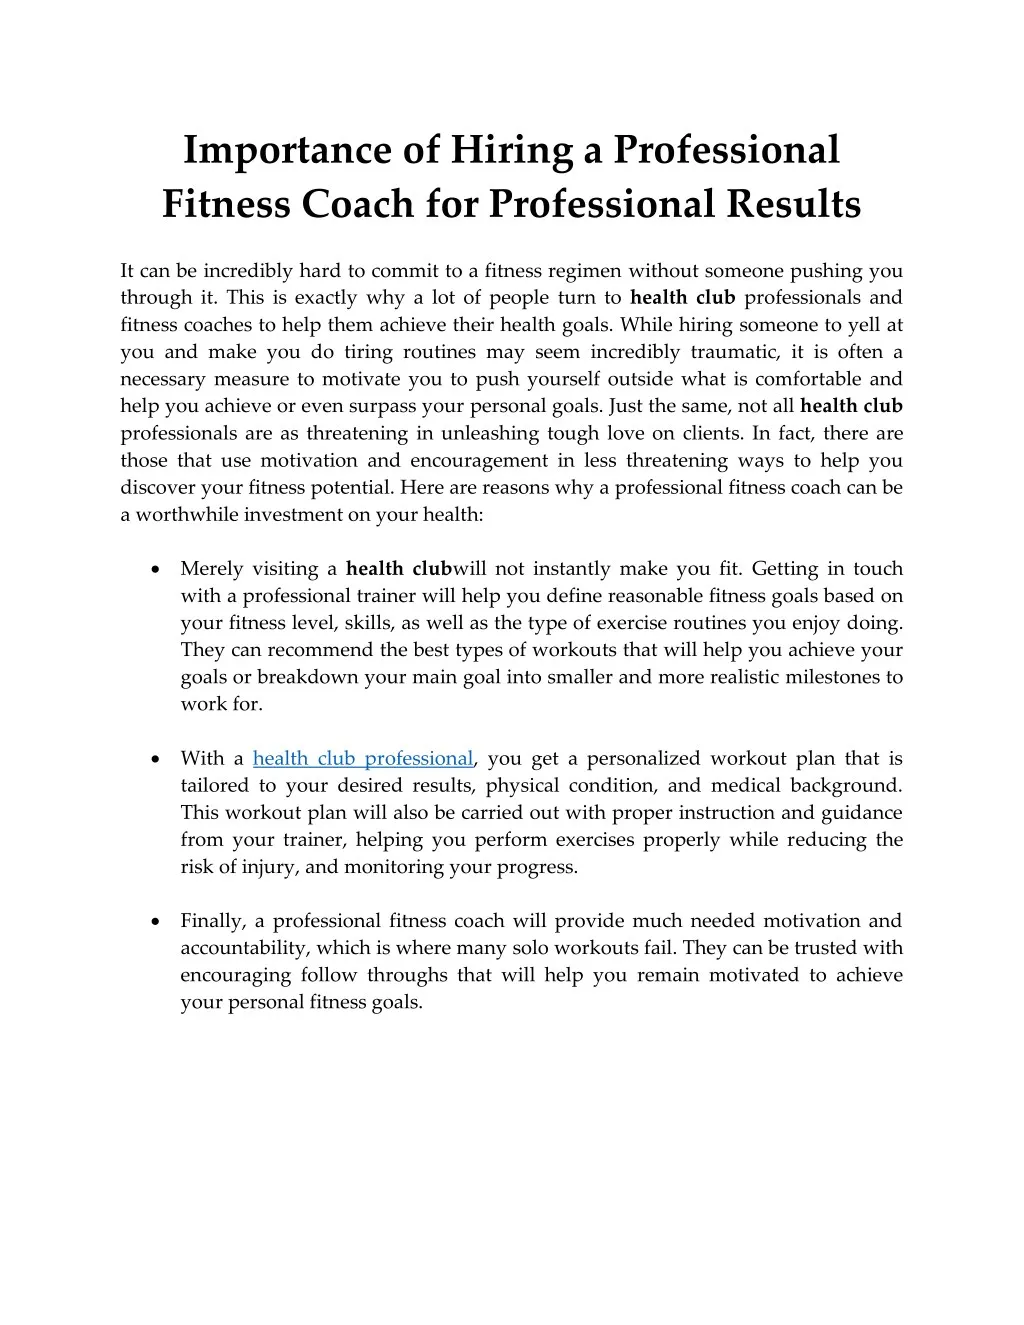 importance of hiring a professional fitness coach